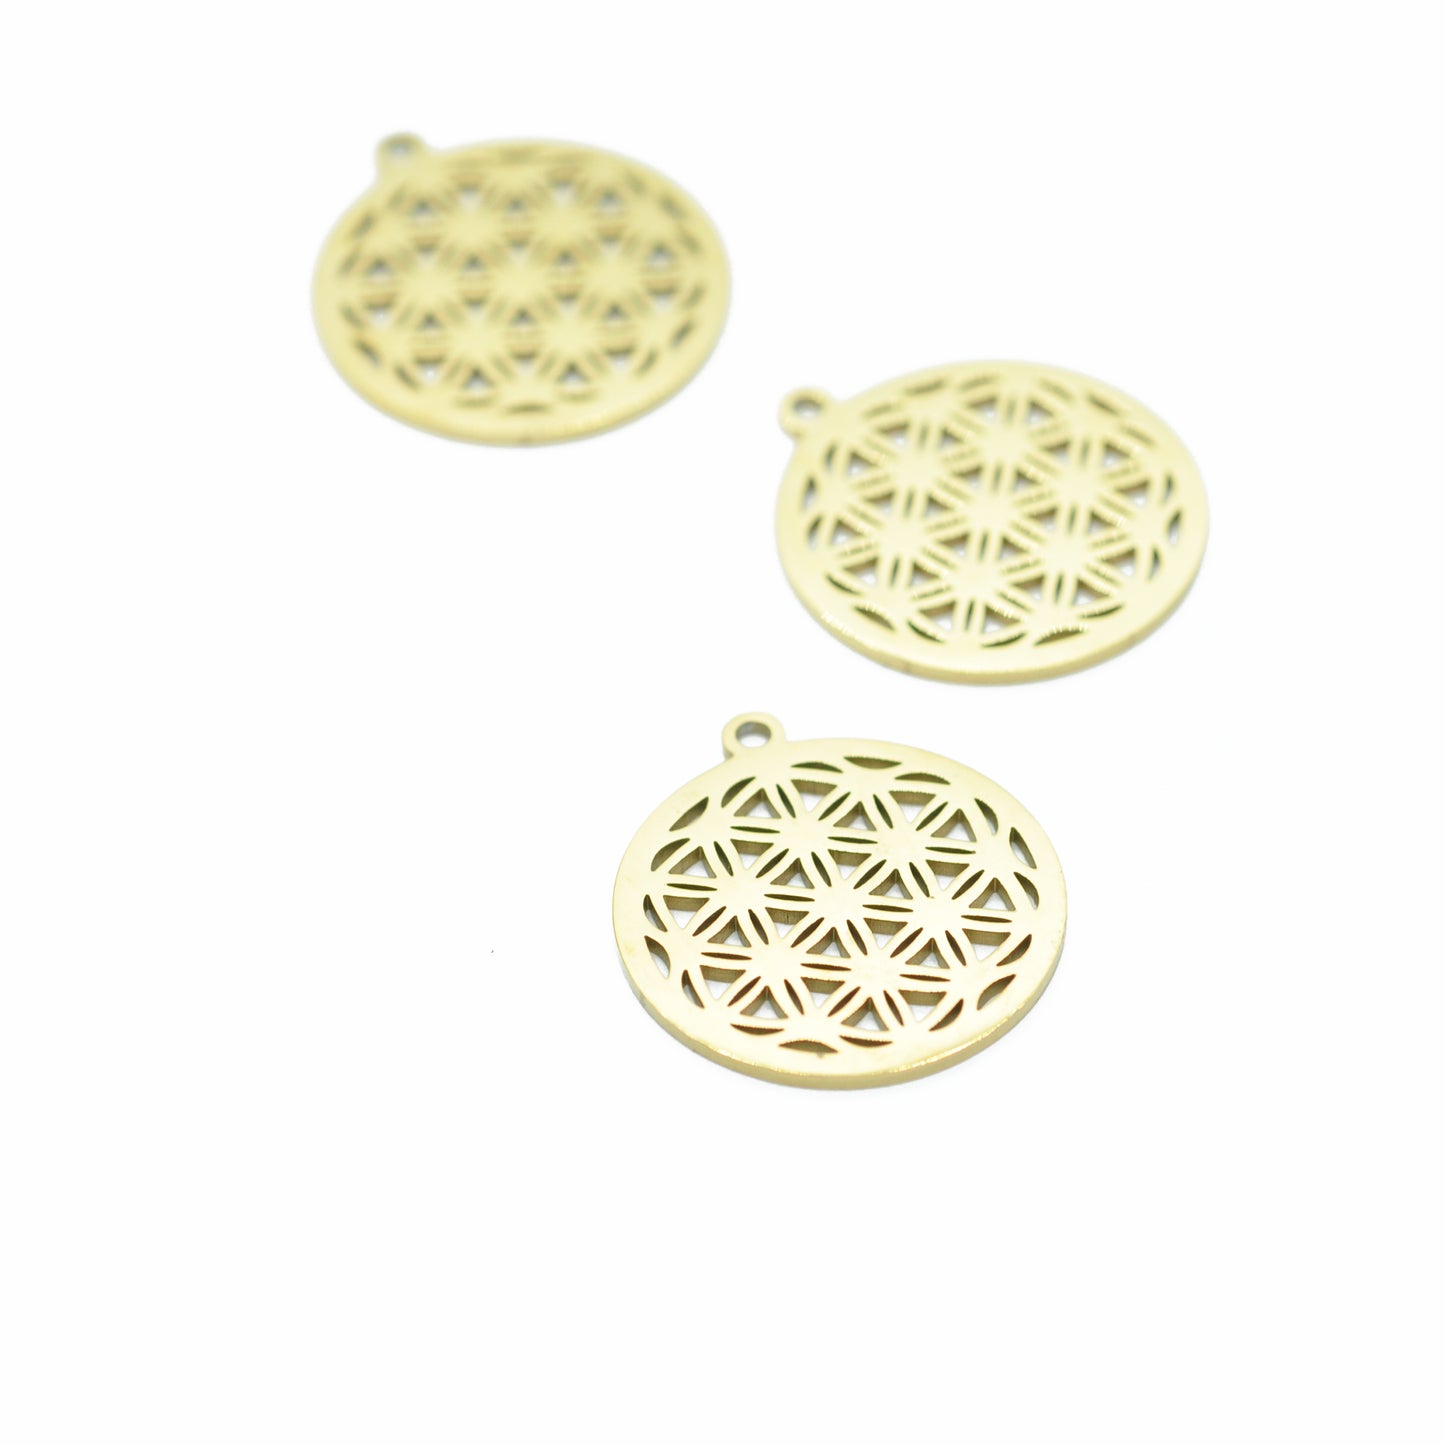 Flower of life pendant / stainless steel gold plated / 20mm